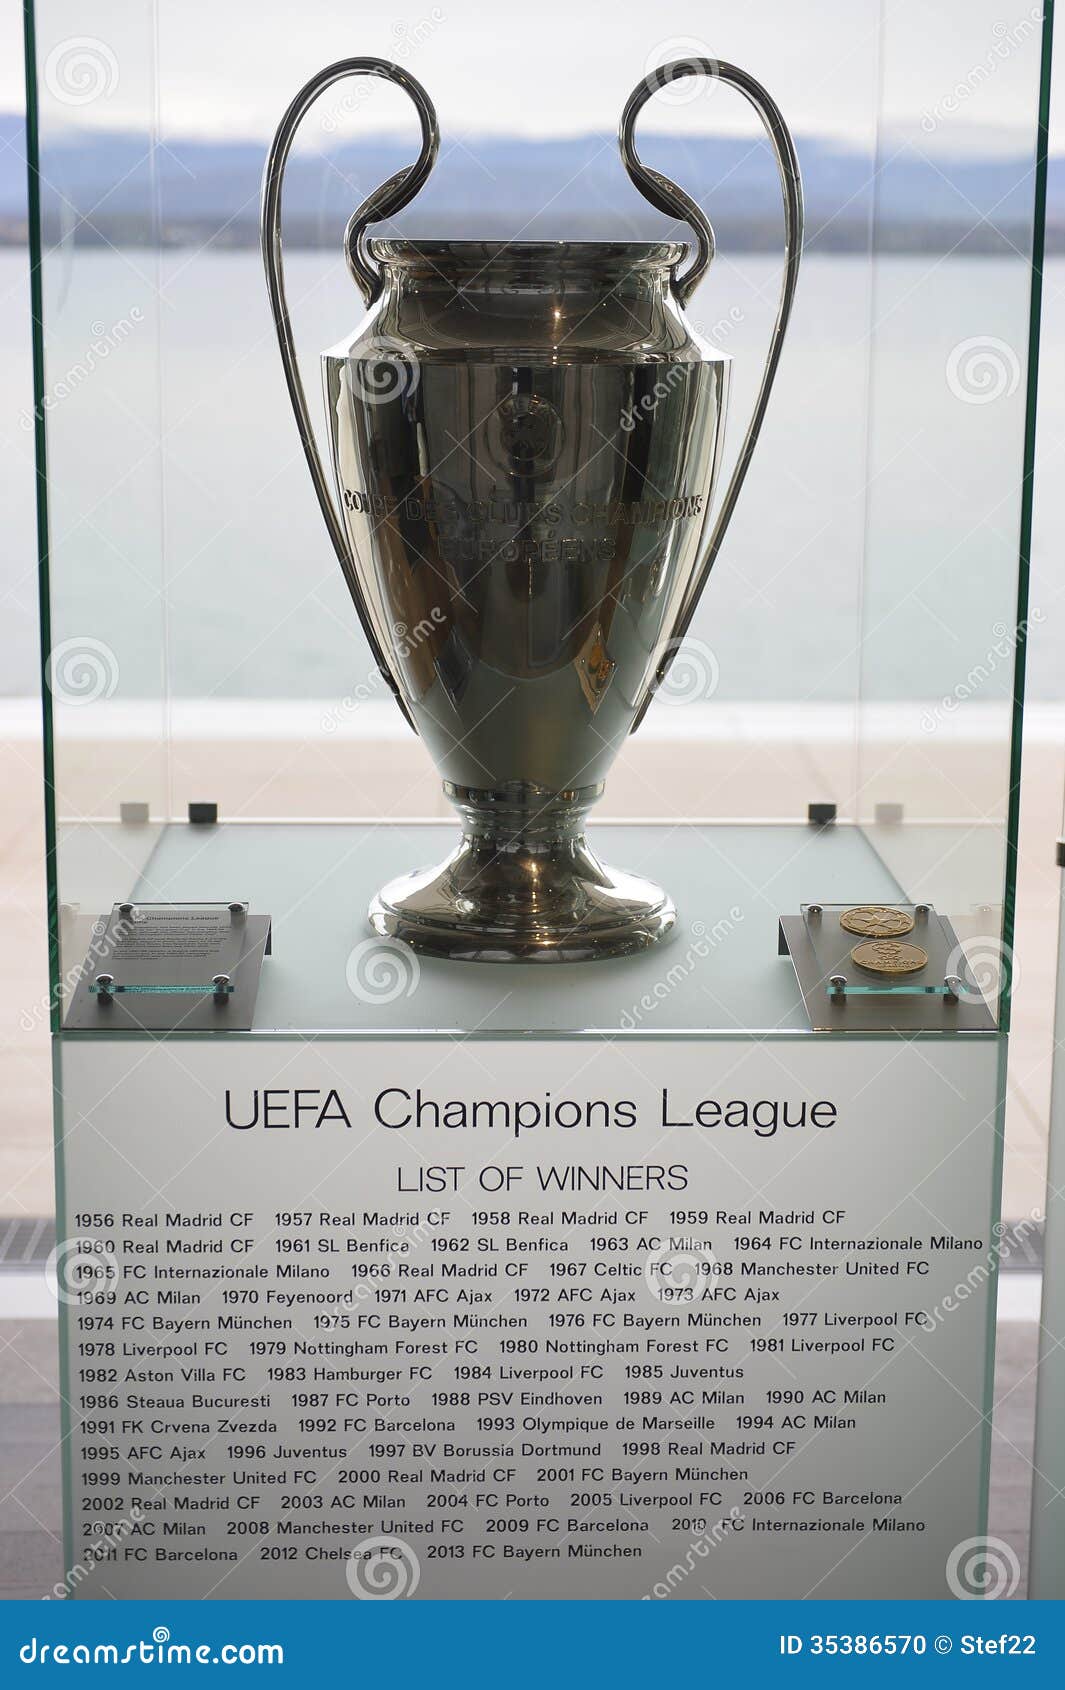 3 0 Champions League Trophy Photos Free Royalty Free Stock Photos From Dreamstime